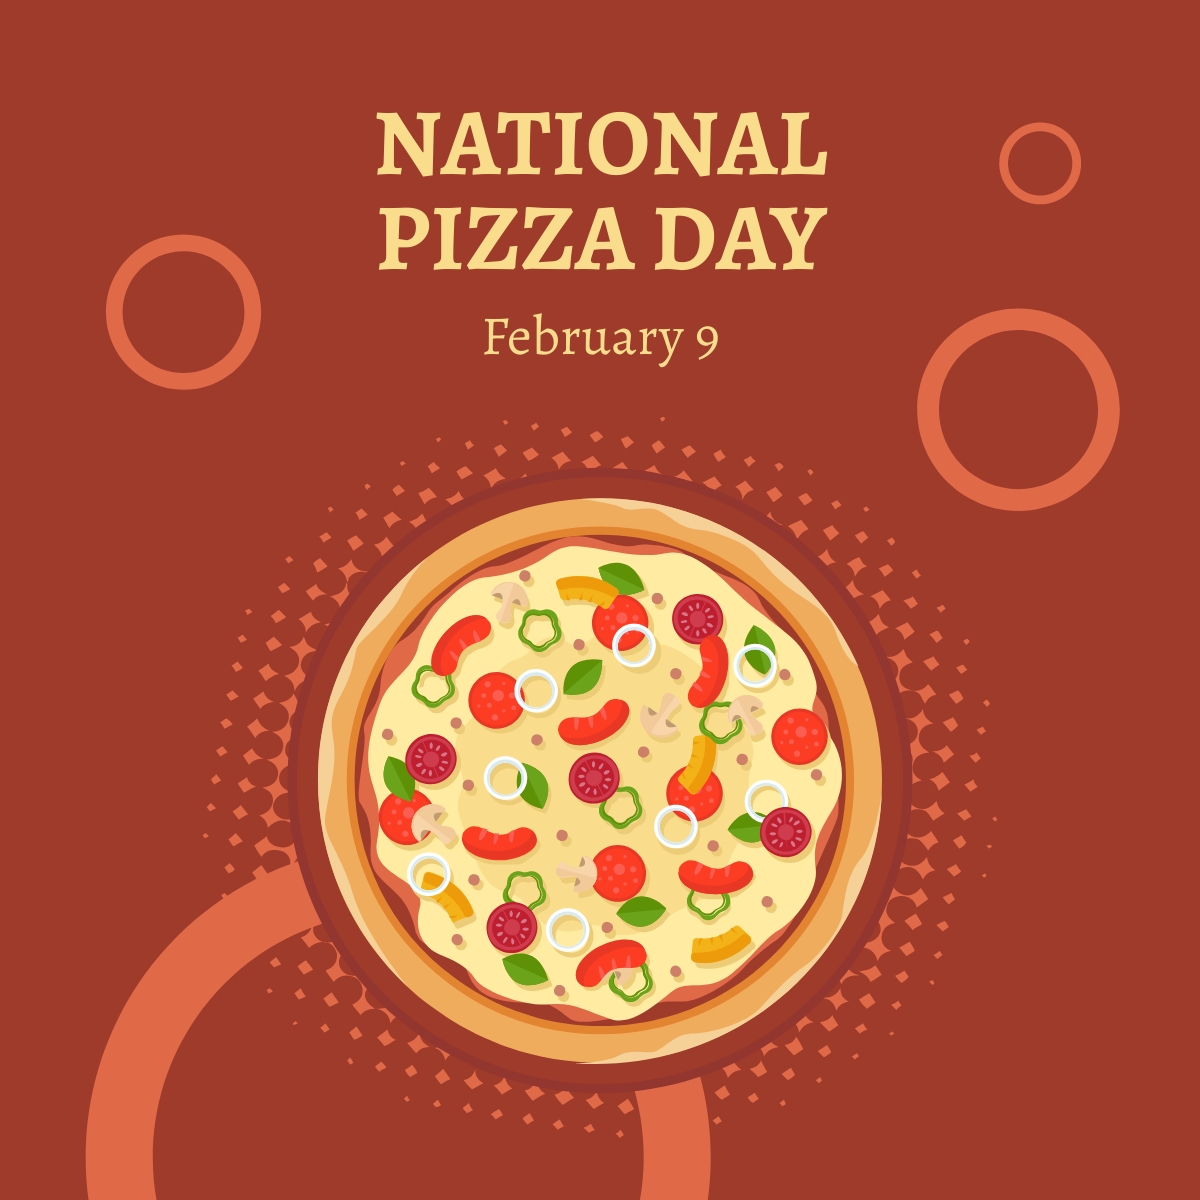 Free National Pizza Day Linkedin Post Template Download in PNG, JPG